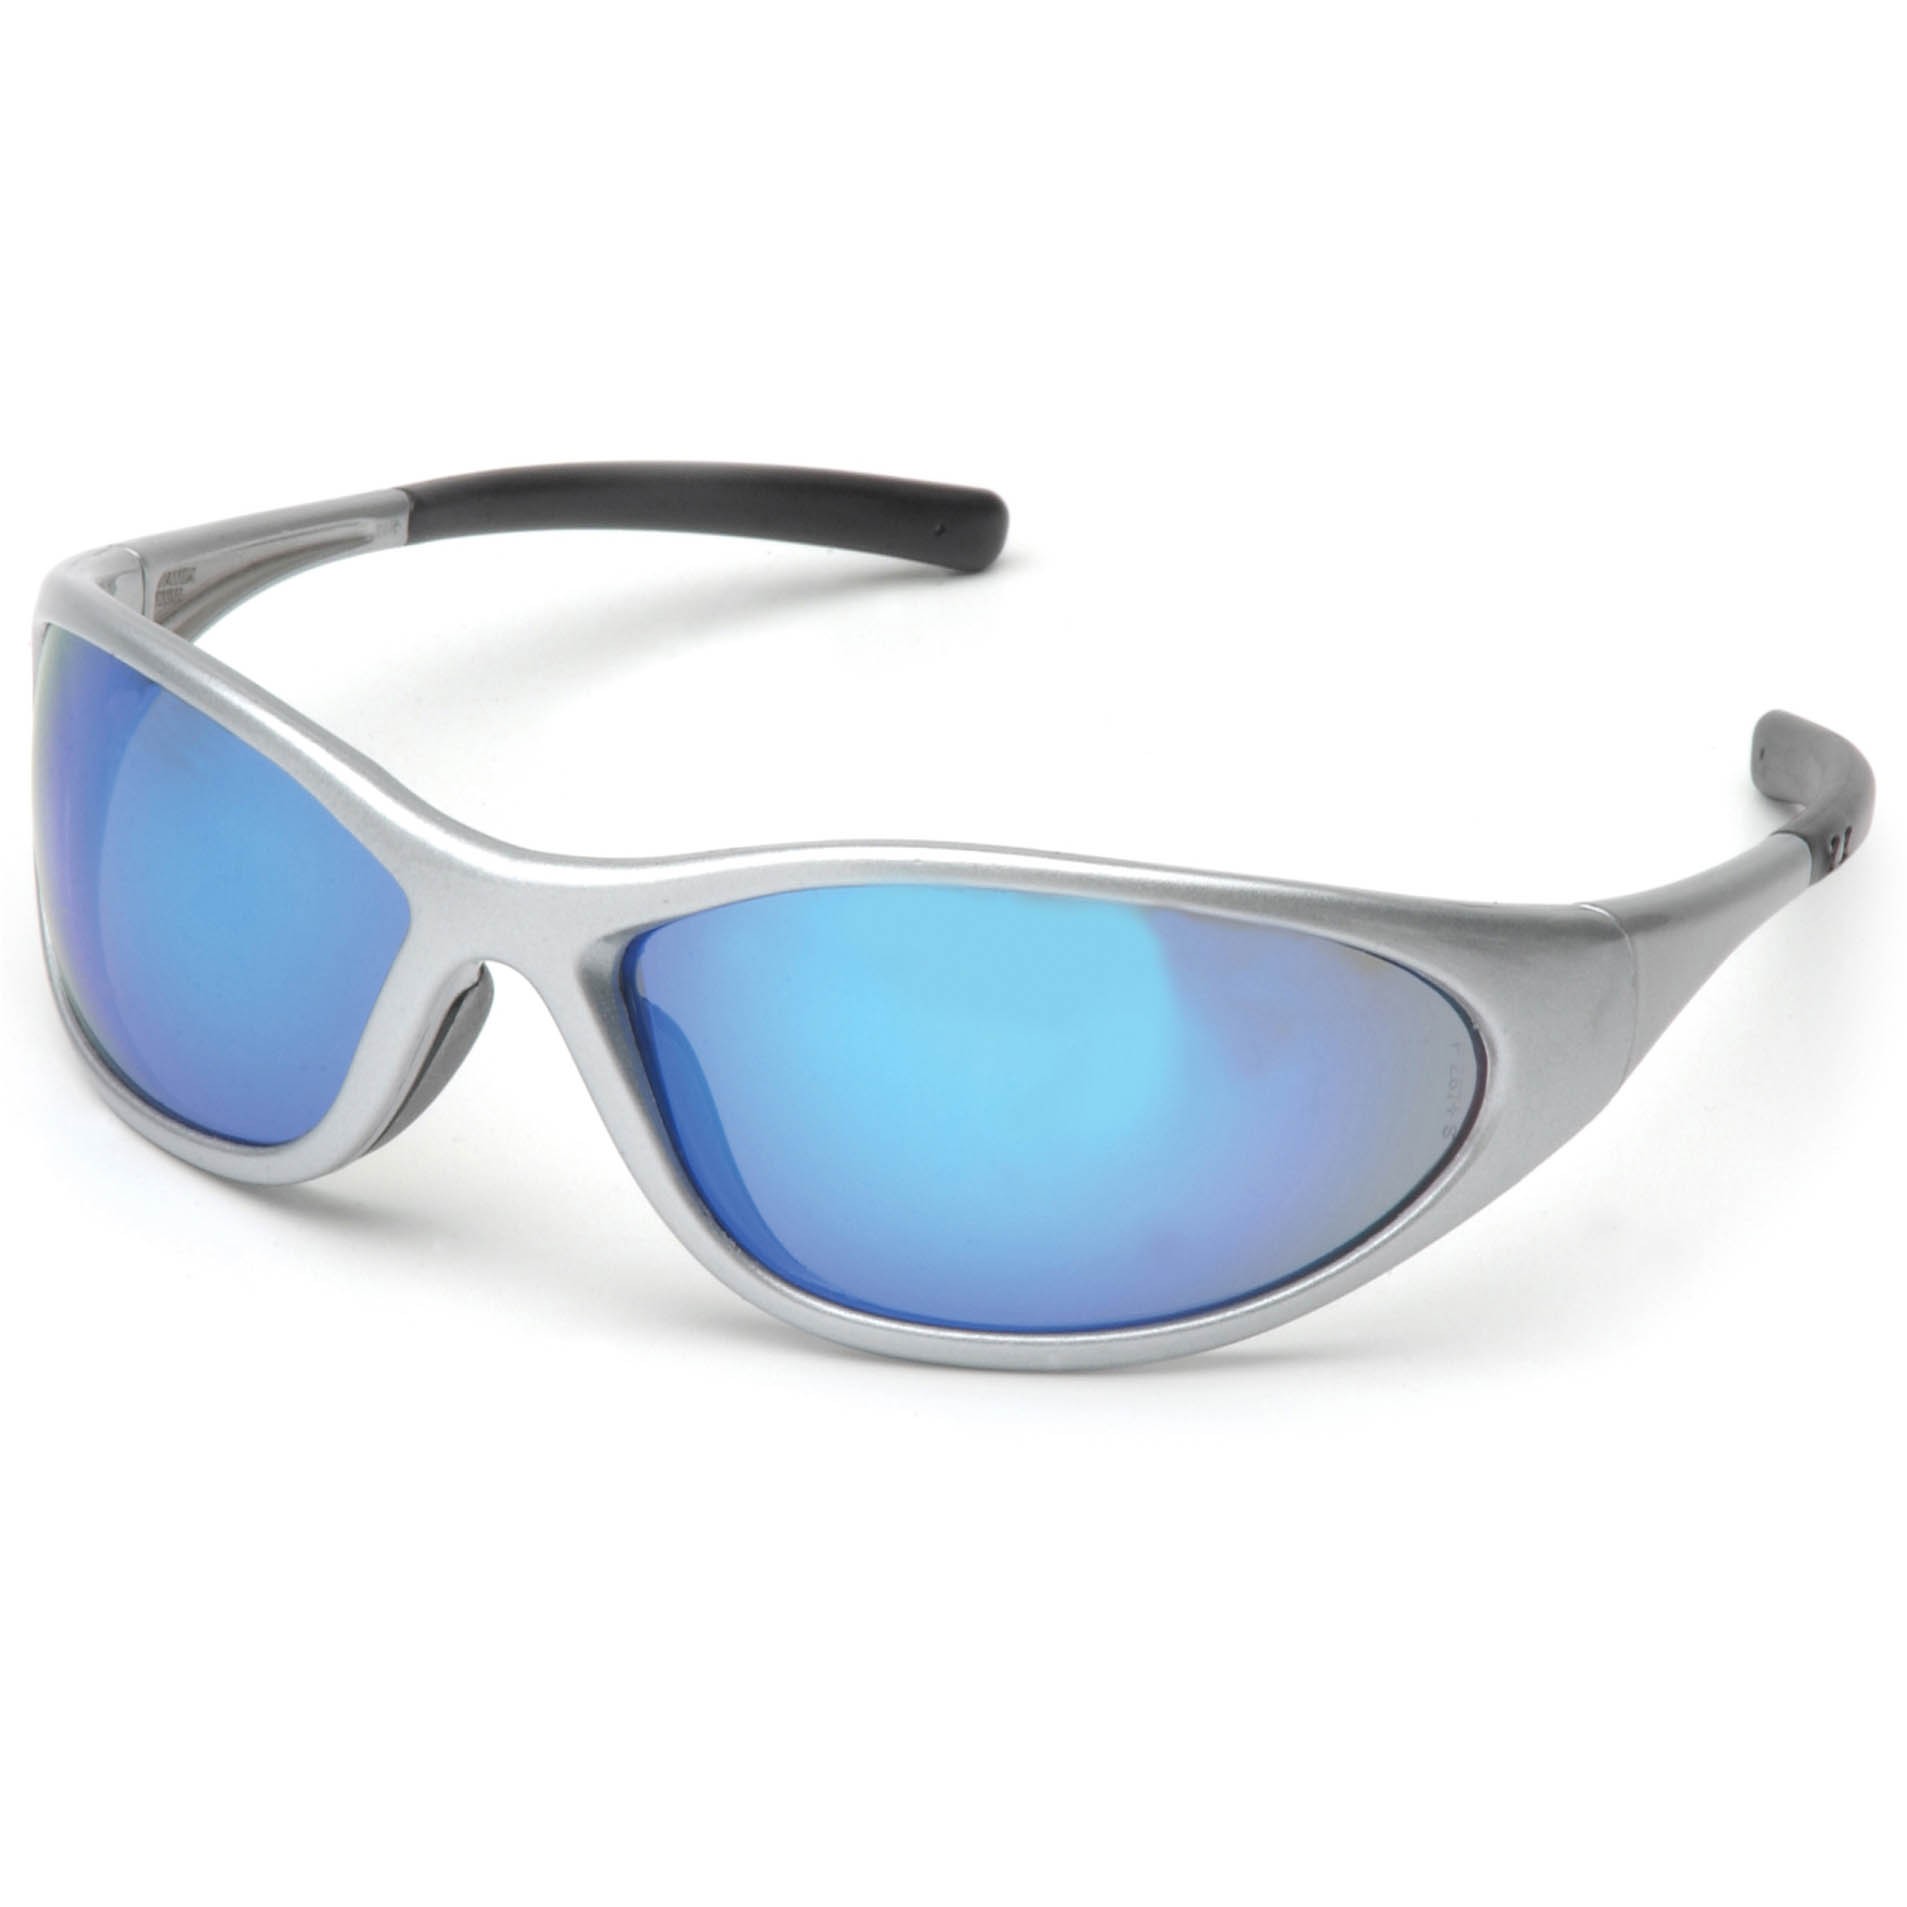 Pyramex Safety Glasses Zone II - Ice Blue Mirror Lens Silver Frame